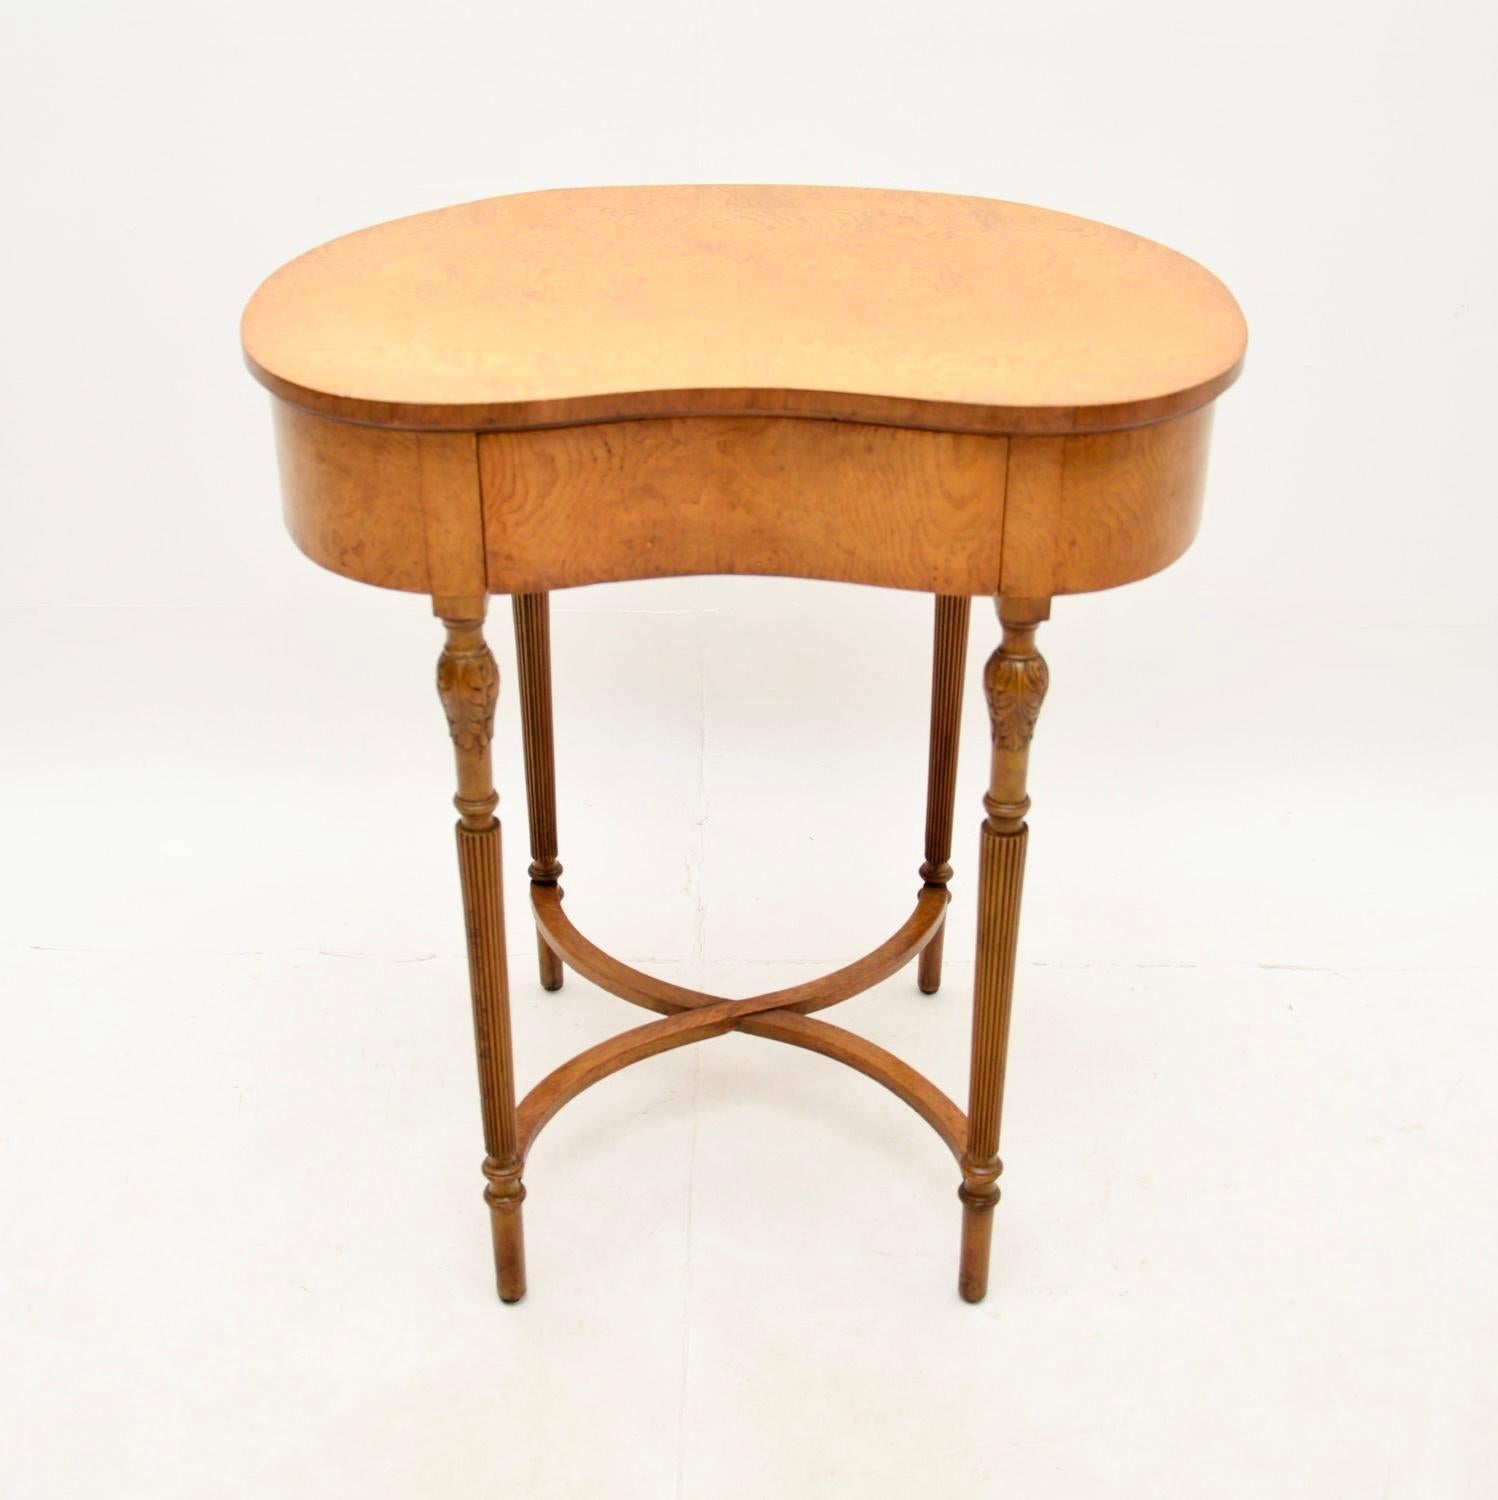 A quite unusual and beautiful antique burr elm kidney shape side / writing table. This was made in England, it dates from the 1920-30’s.

It is of superb quality, the kidney shaped top has a single drawer and stands on fluted tapered legs with cross